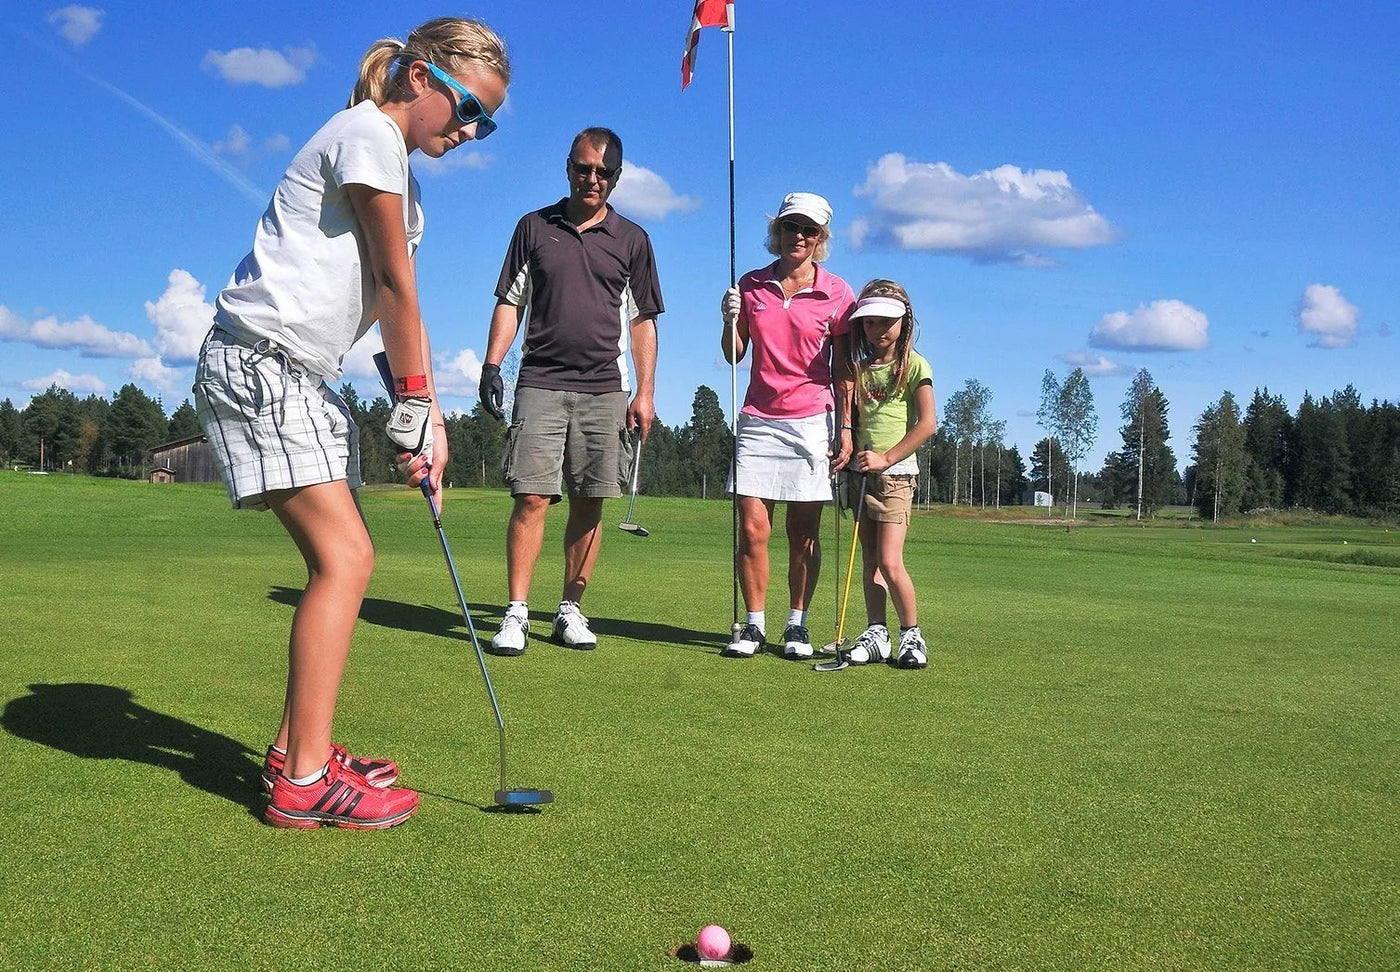 Family-friendly golf courses with family and kid putting